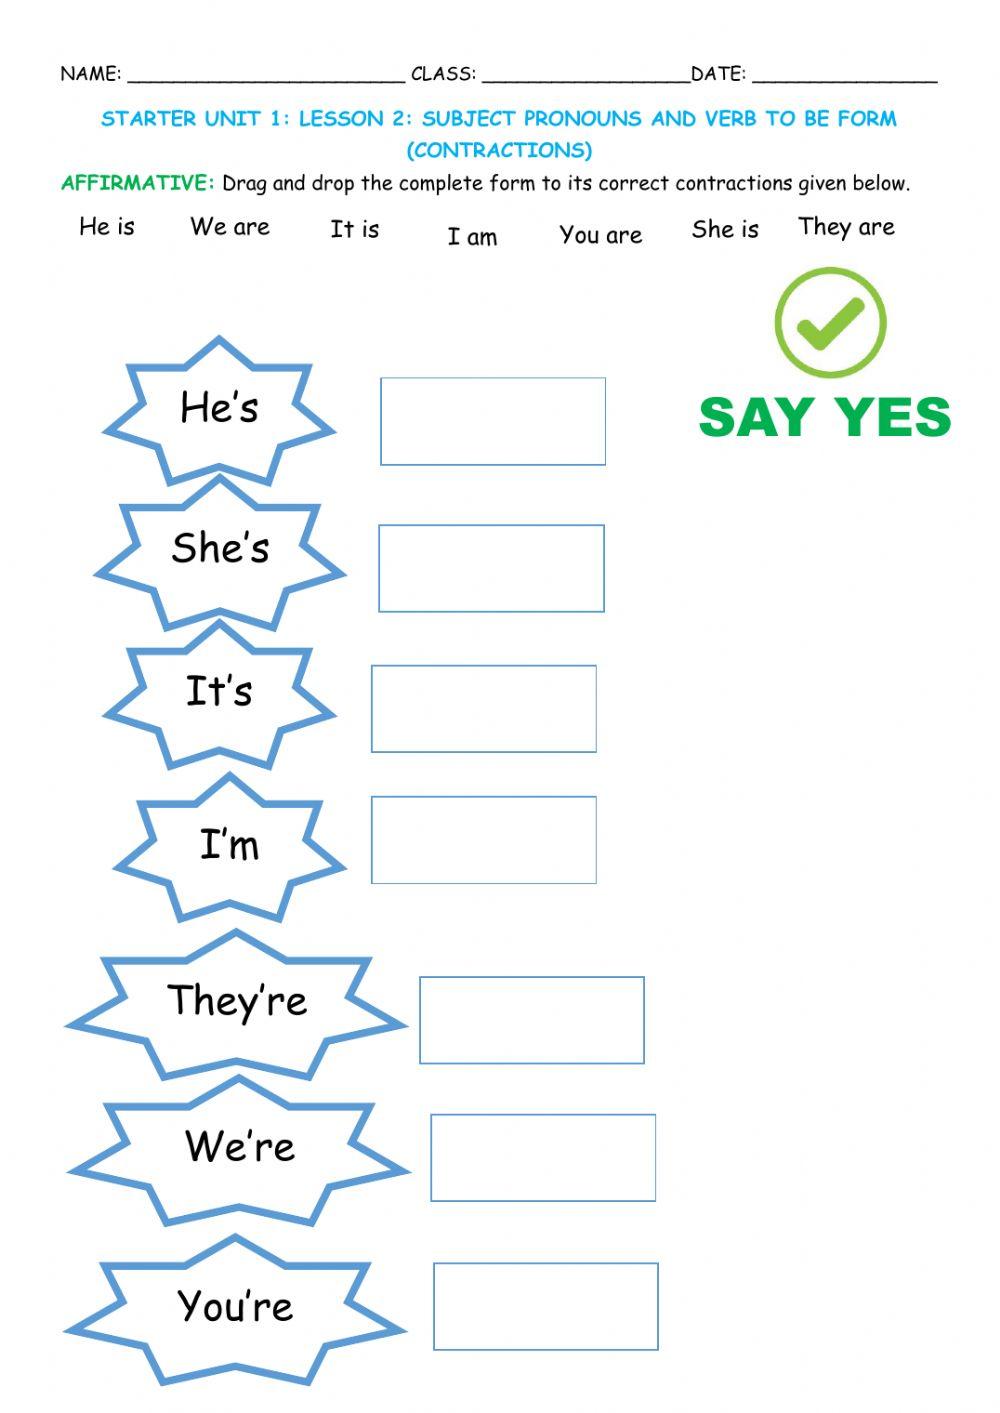 Starter unit 1: subject pronouns and contractions